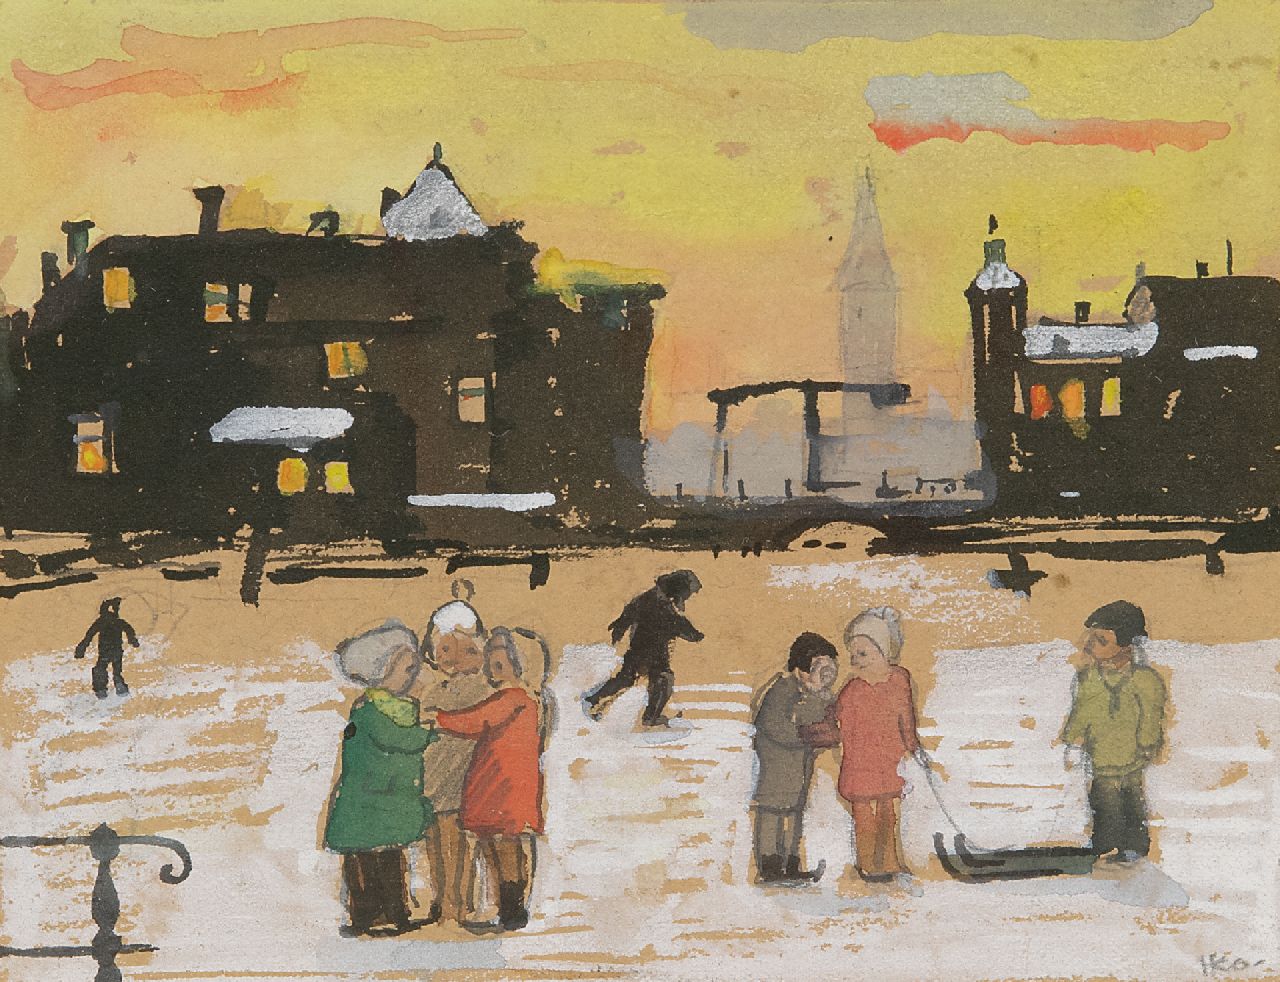 Kamerlingh Onnes H.H.  | 'Harm' Henrick Kamerlingh Onnes, Children on the ice, pencil and watercolour on paper 10.5 x 13.6 cm, signed l.r. with monogram and dated '3 Jan 58'